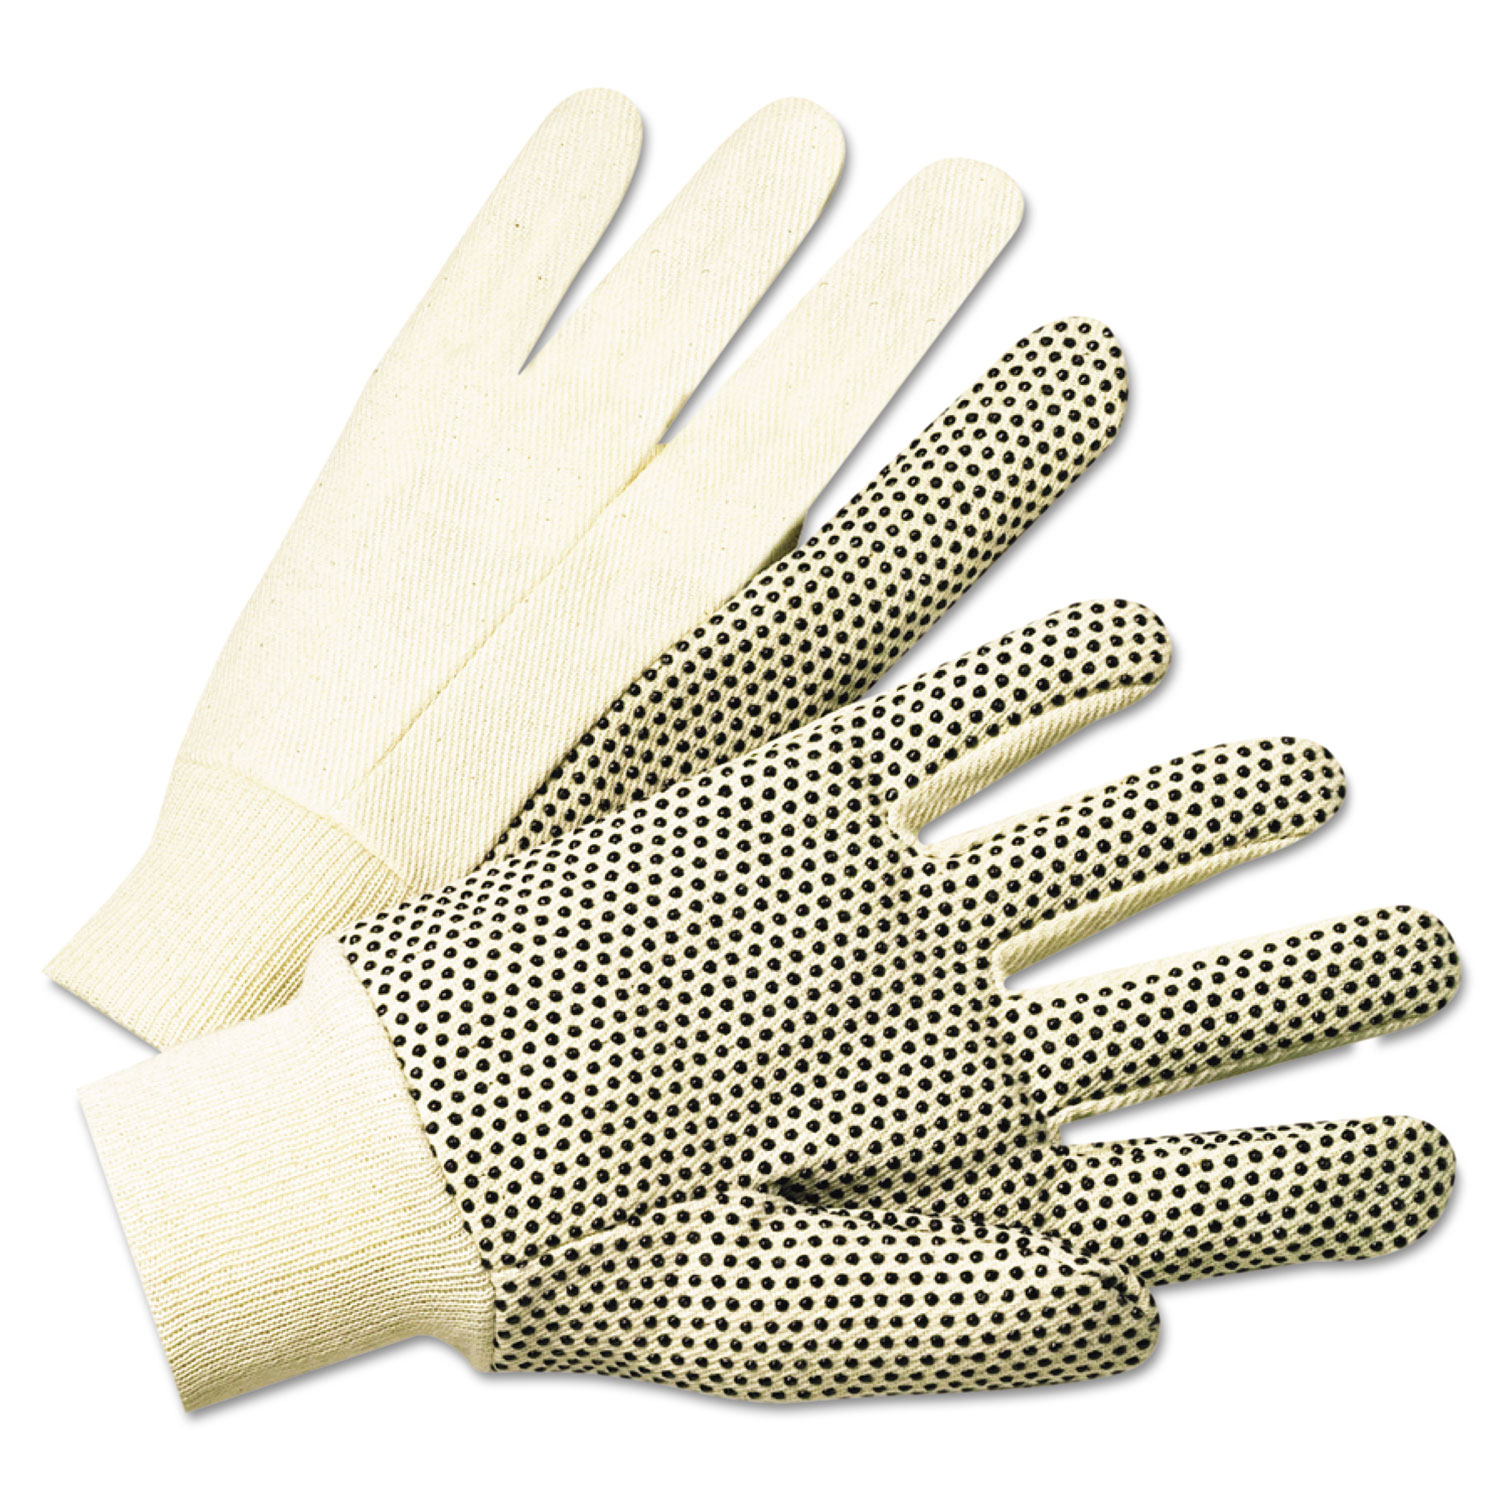  Anchor Brand 780K 1000 Series PVC Dotted Canvas Gloves, White/Black, Large, 12 Pairs (ANR1005) 